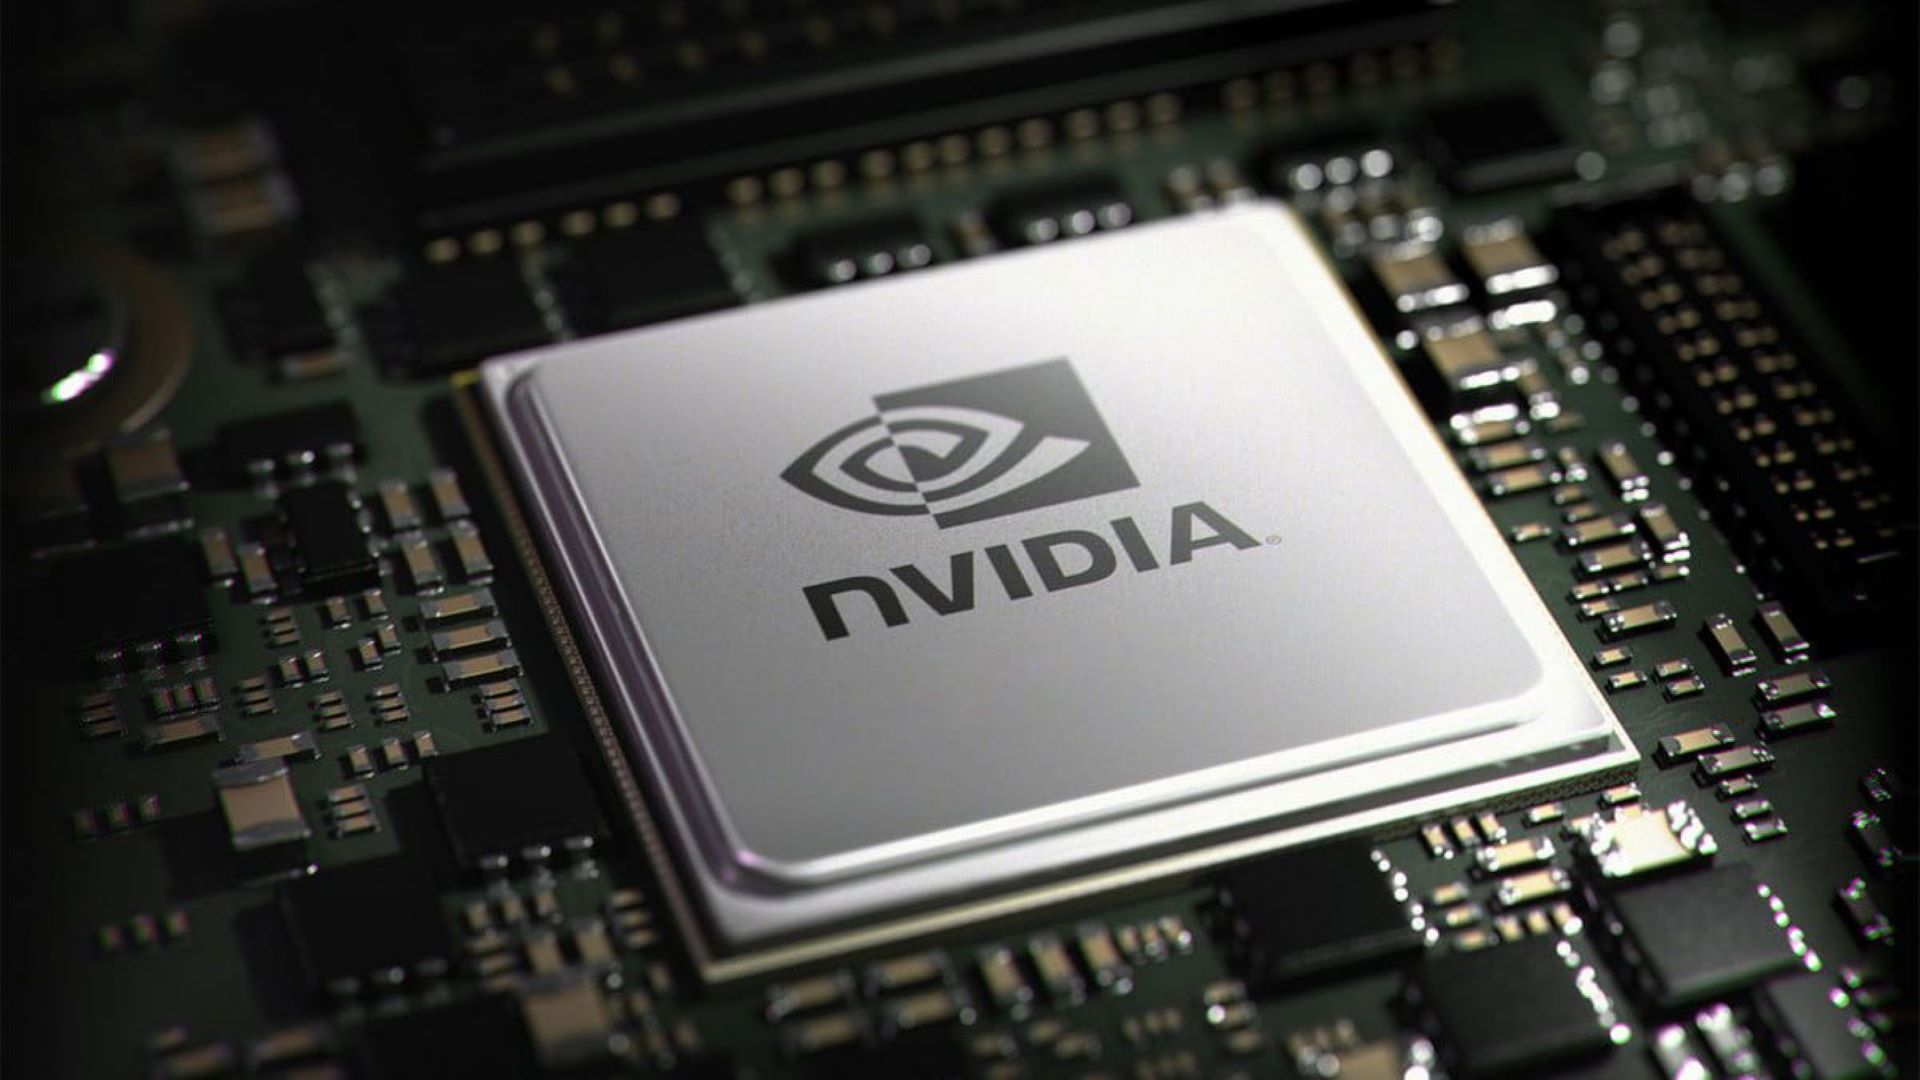 Nvidia RTX 4090 GPU could feature over 40% more CUDA cores than RTX 3090